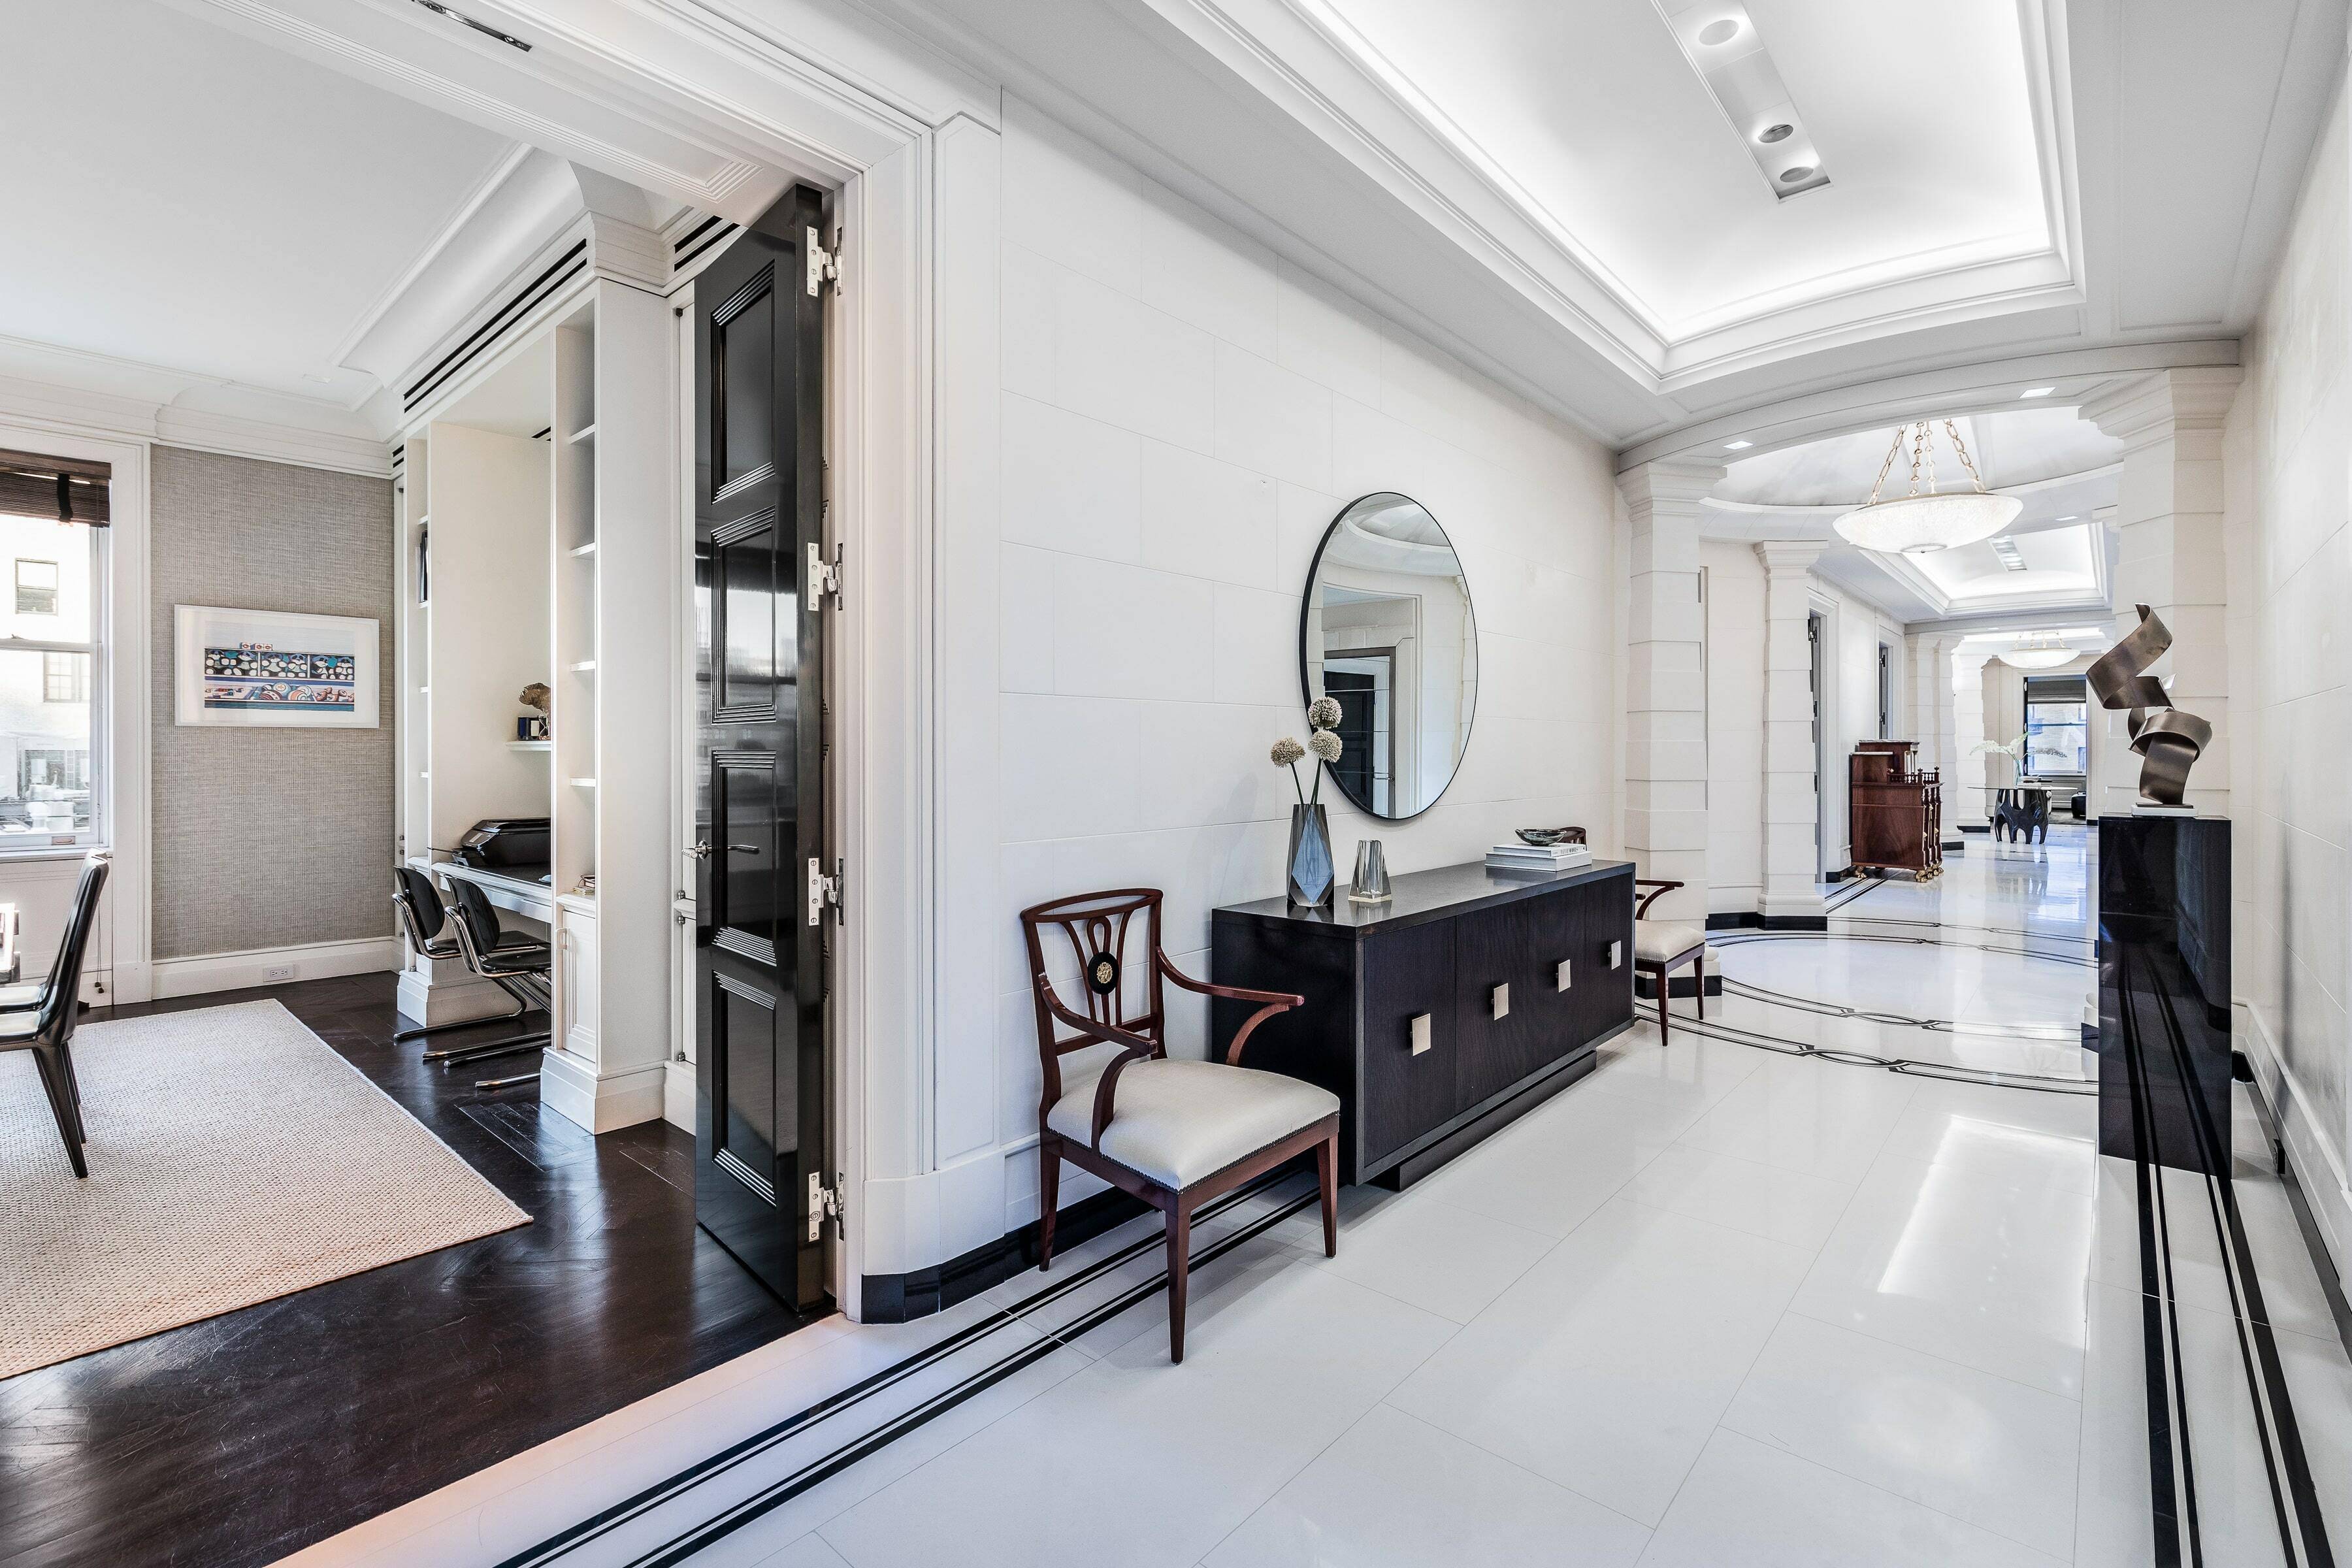 This lavish fifteen room residence, occupying the entire tenth floor of elegant prewar 550 Park Avenue, epitomizes old New York glamour and fine living while offering the latest bespoke amenities, ...